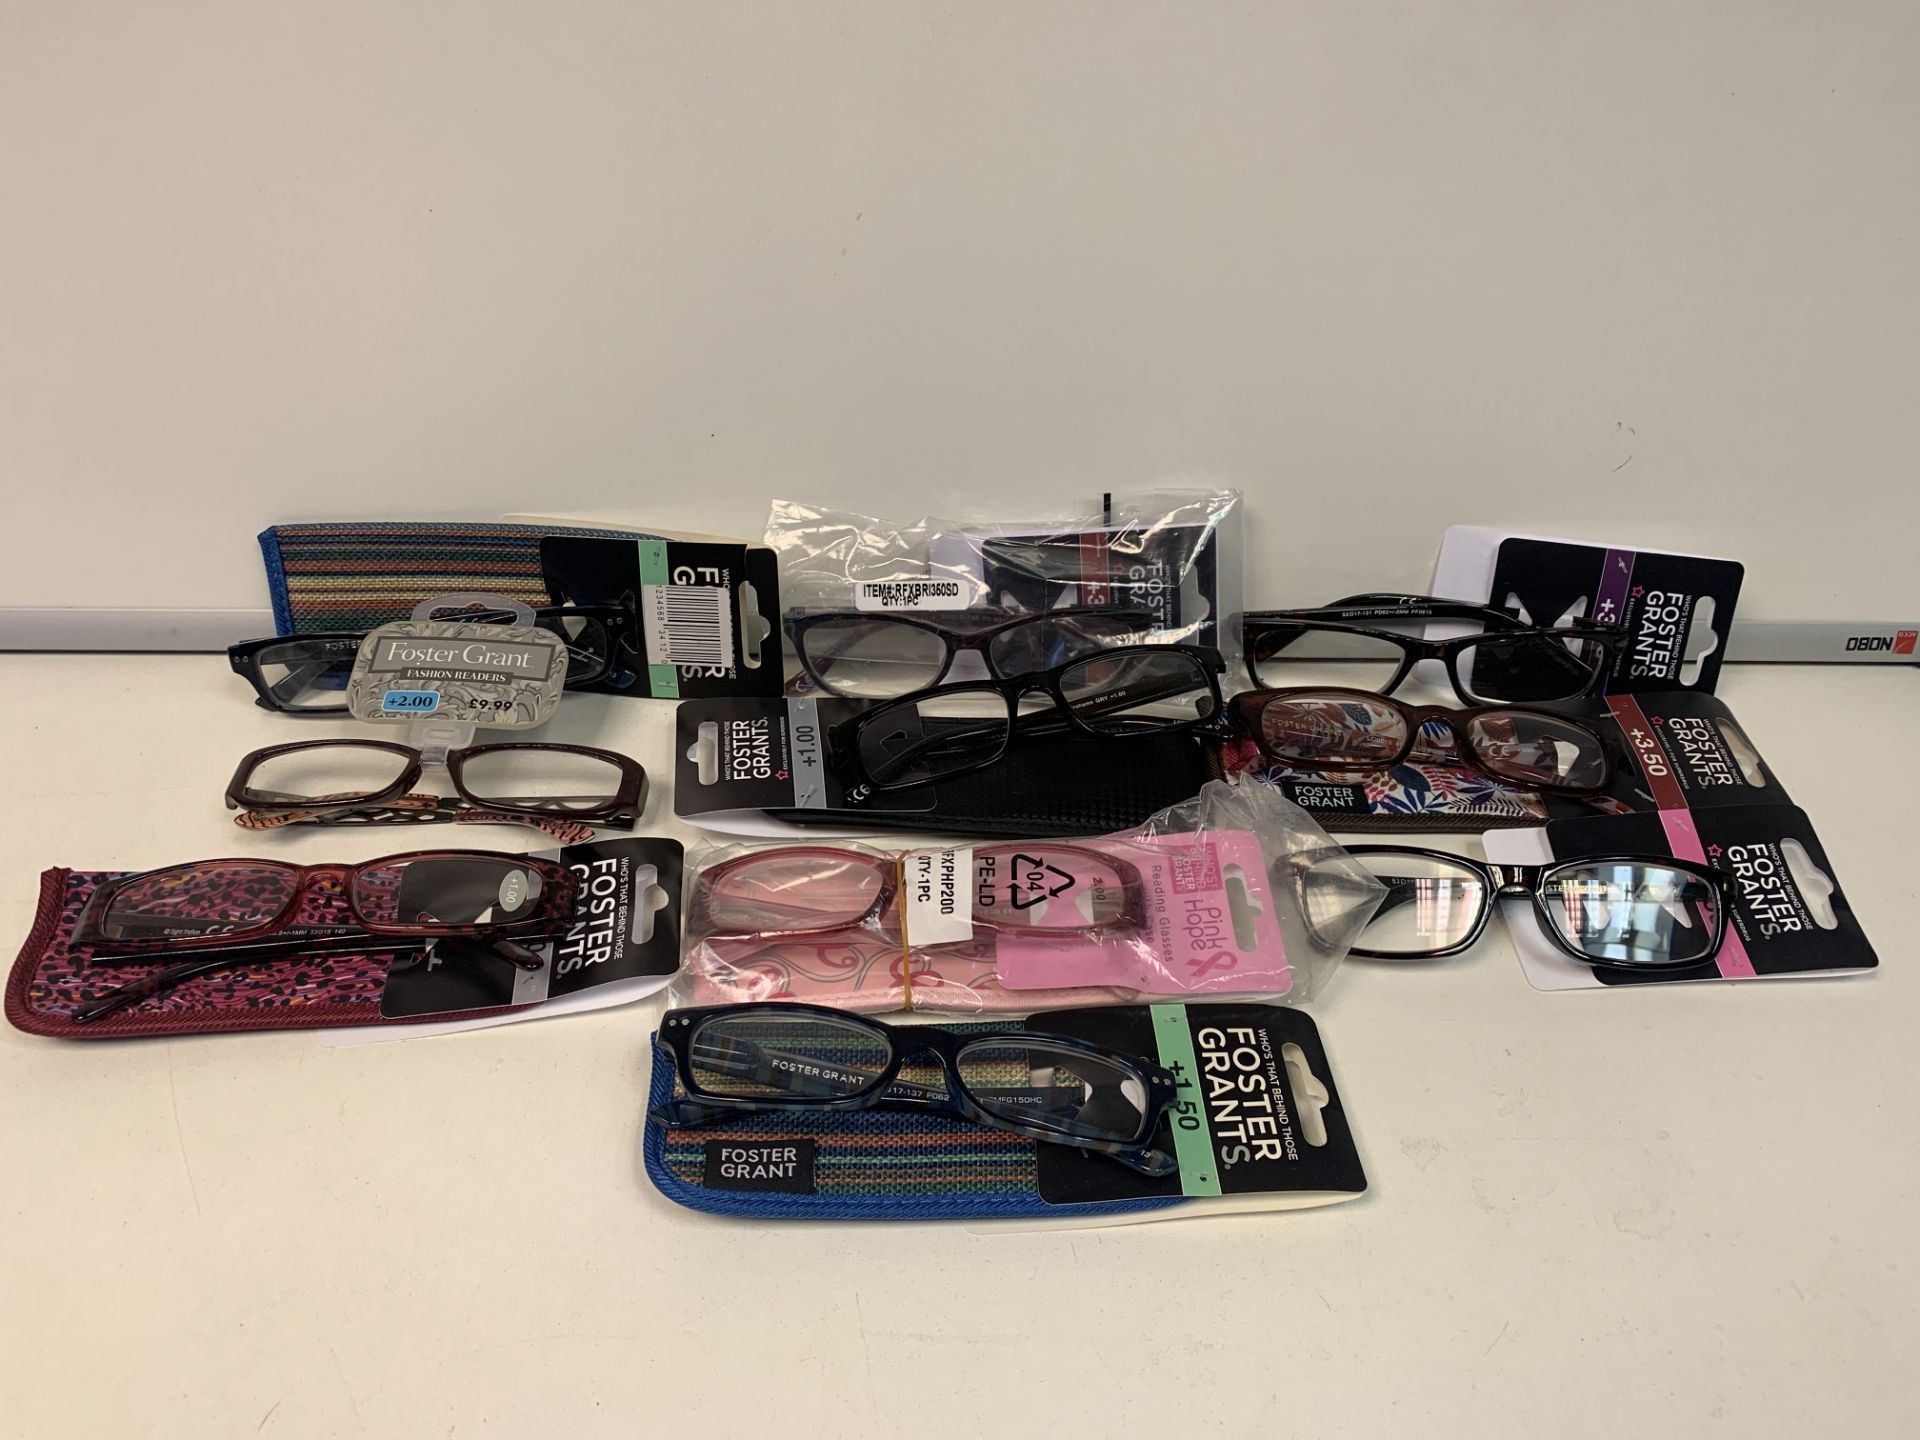 50 X BRAND NEW FOSTER GRANT GLASSES/SUNGLASSES IN VARIOUS STYLES RRP £12-40 EACH (row19)